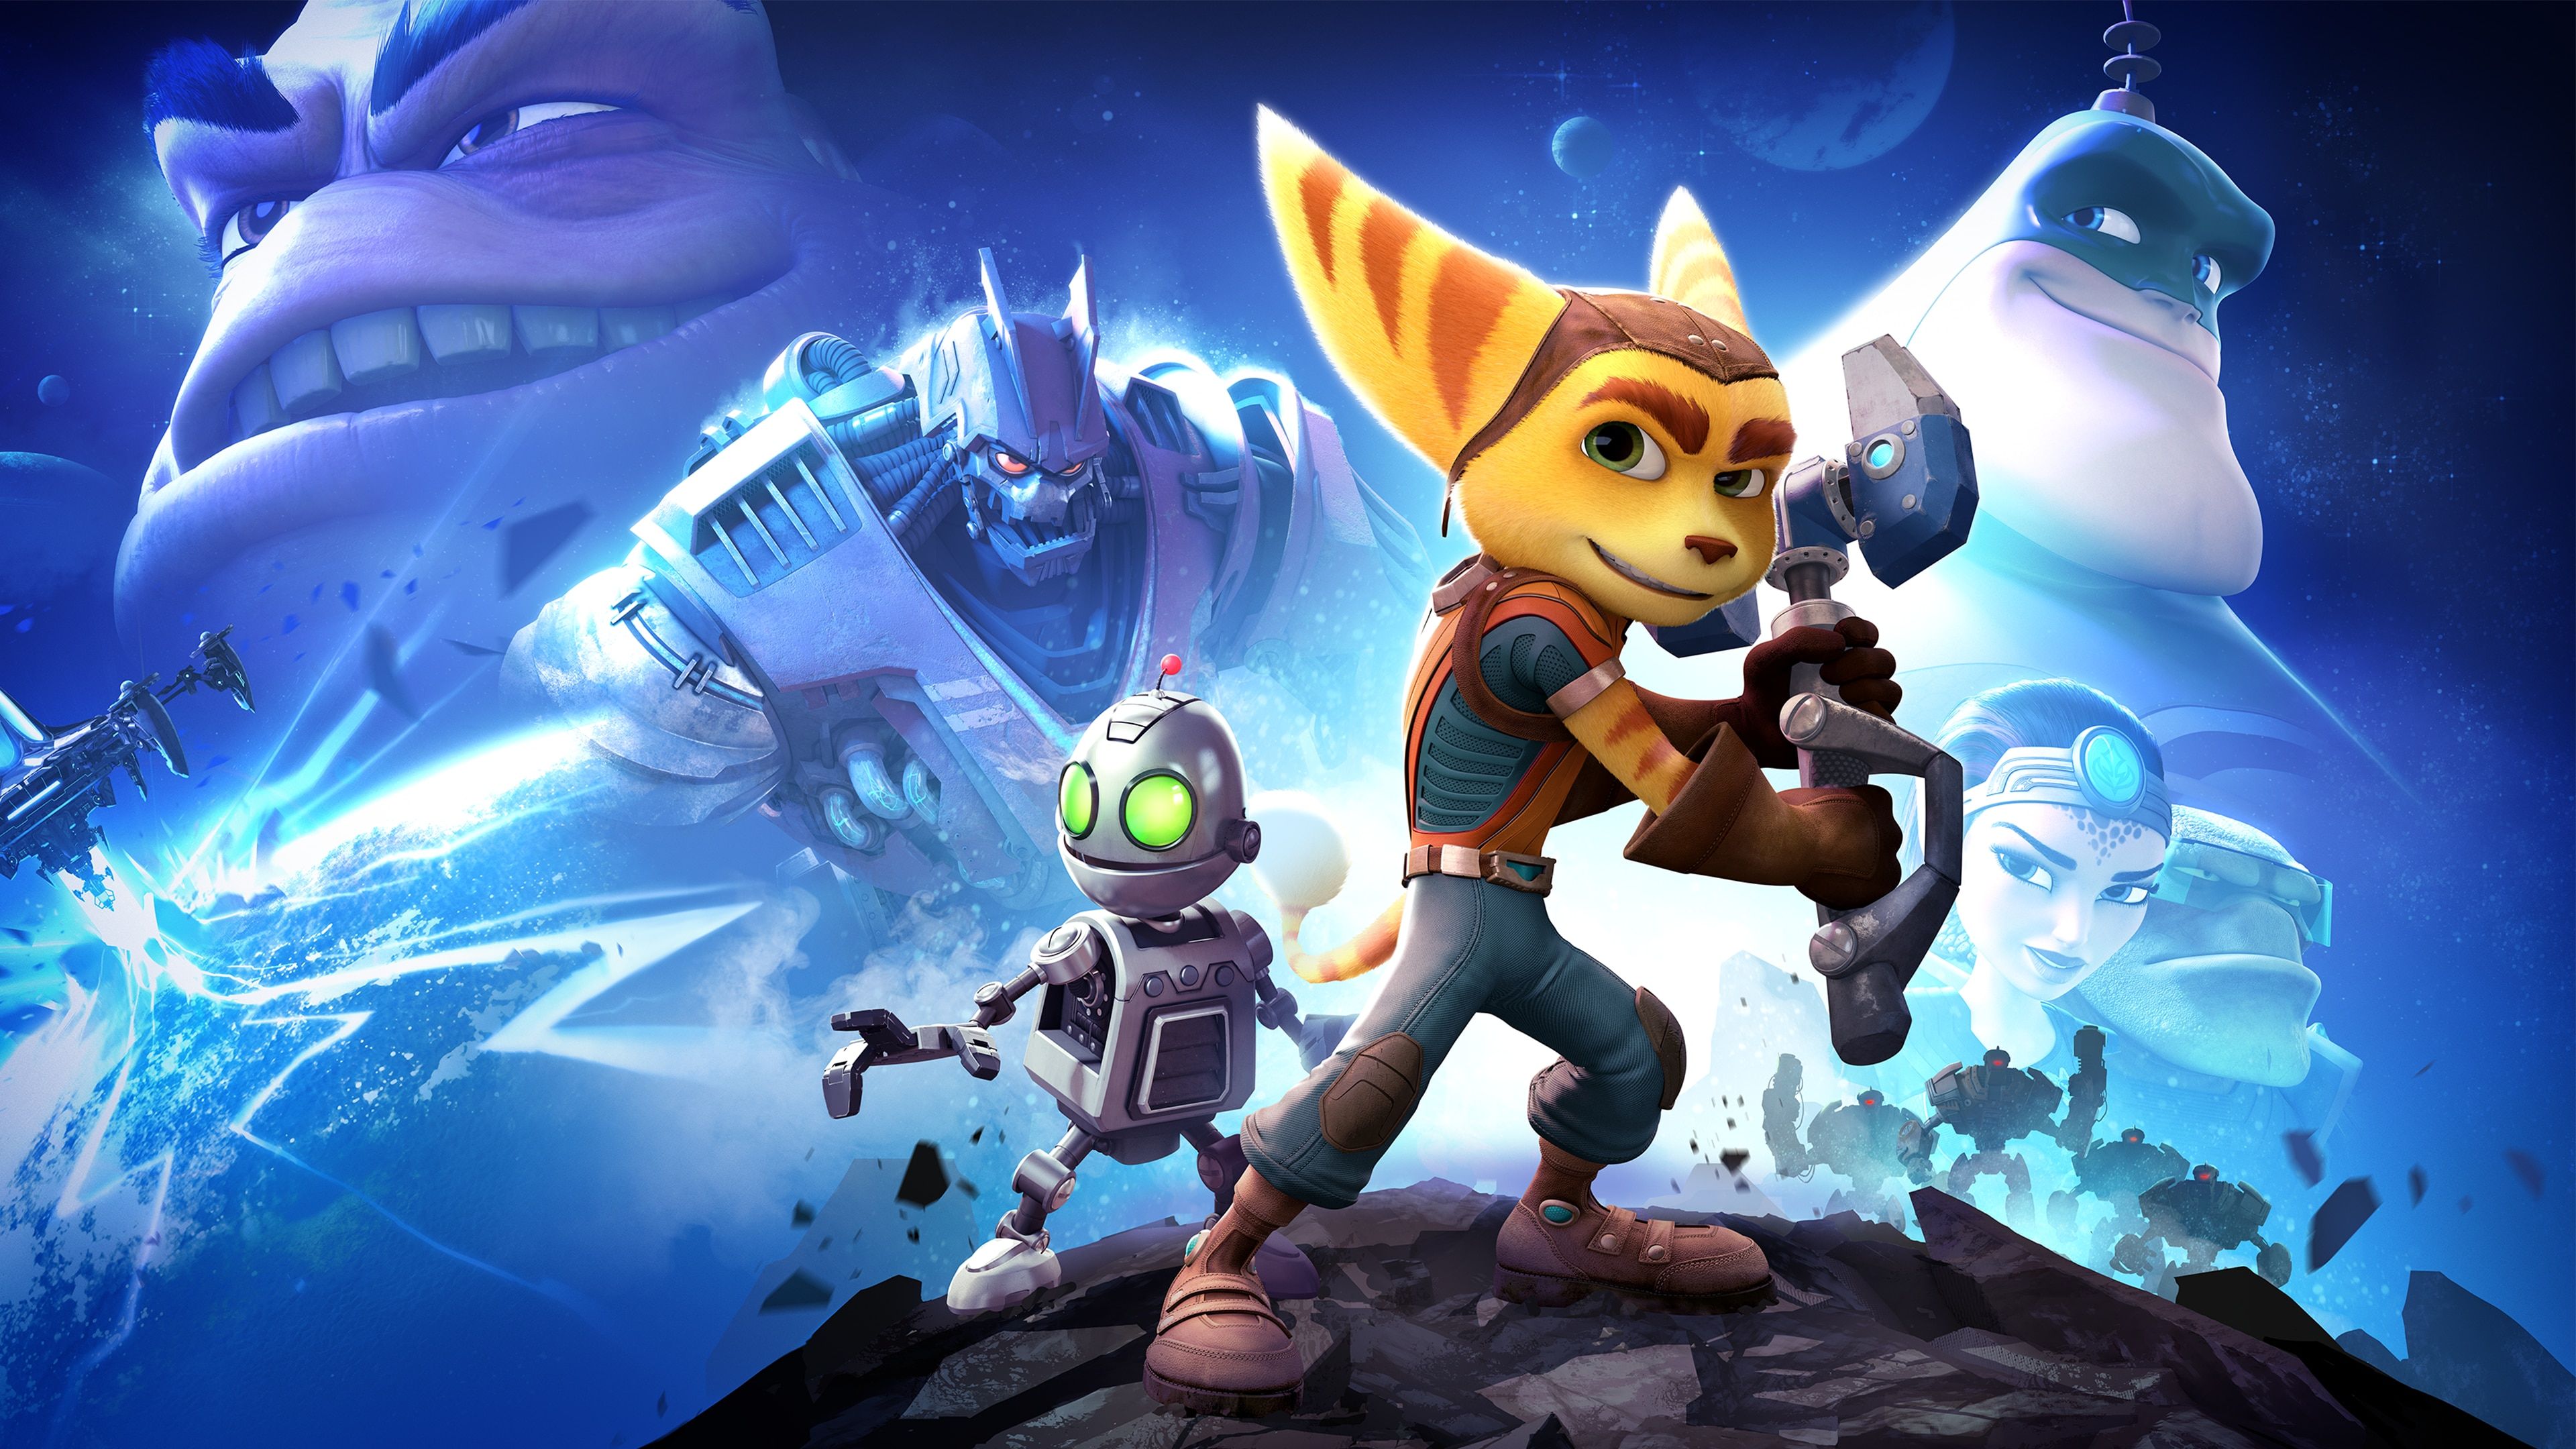 Ratchet & Clank™ cover image